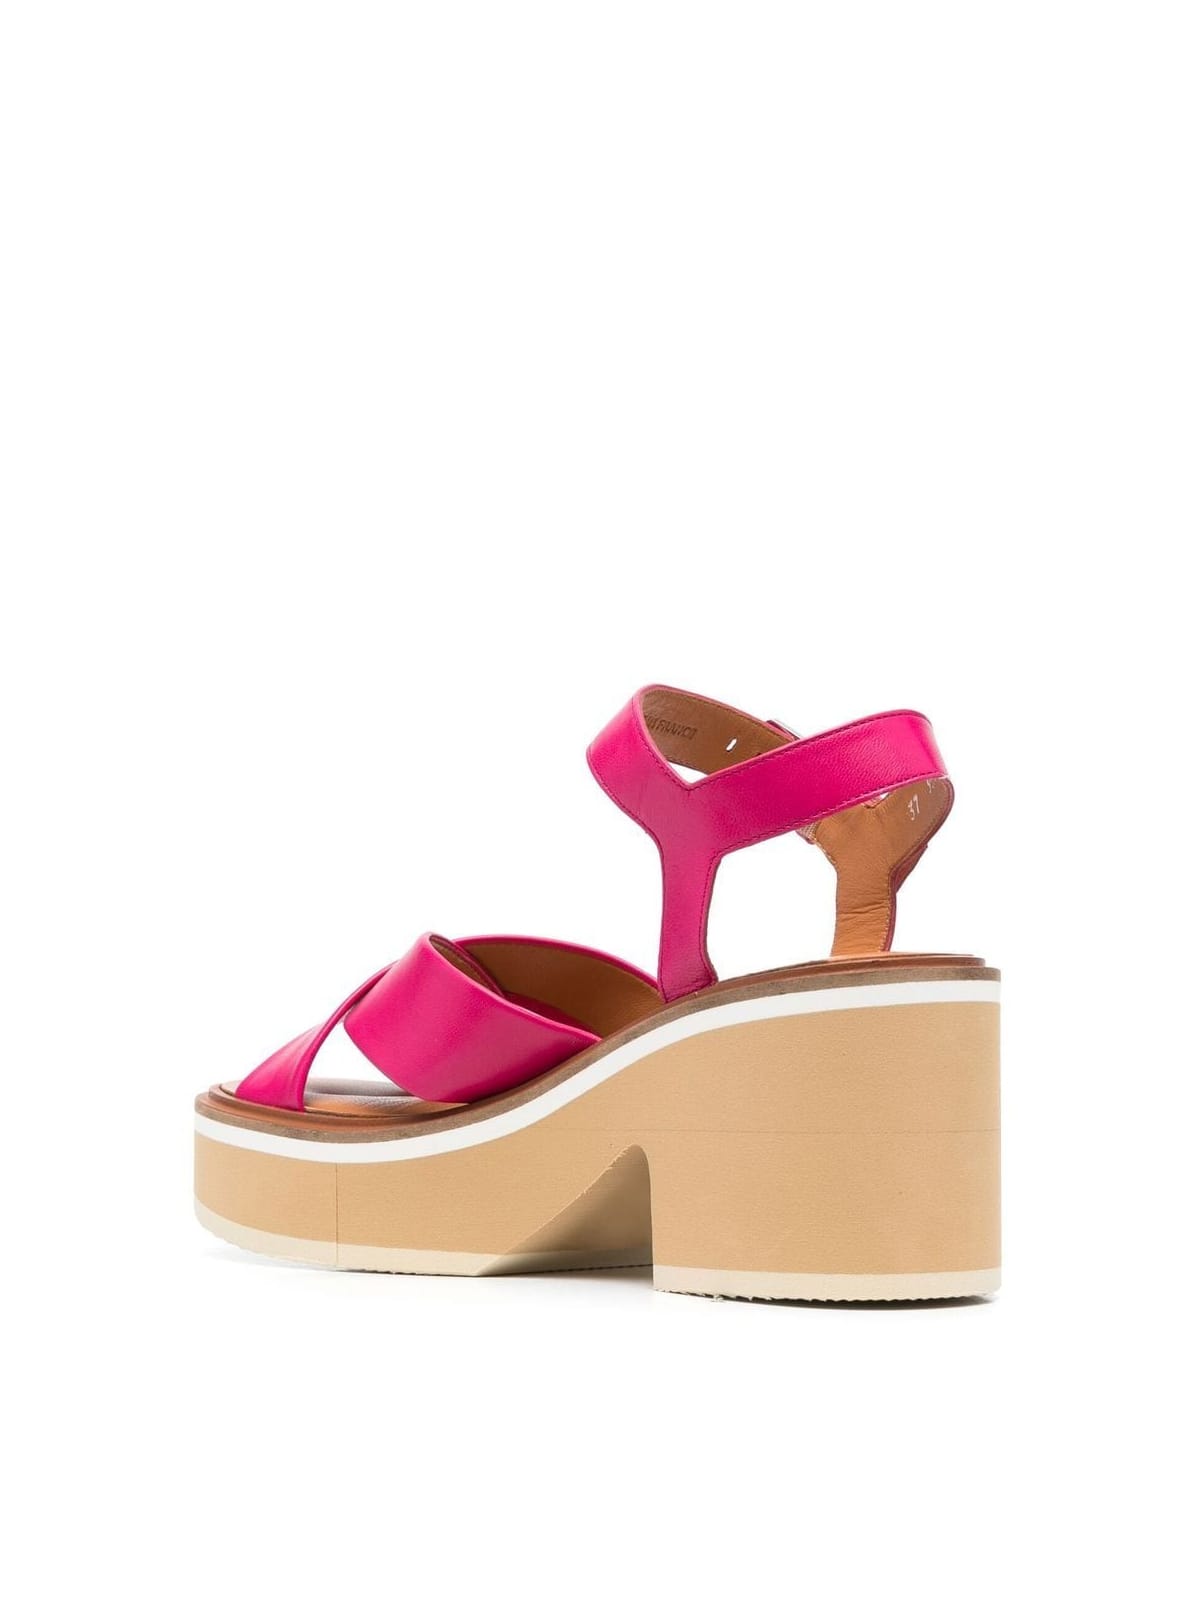 Shop Clergerie Charline9 Criss Cross Sandal With Closure At The Ankles In Hibis Nap